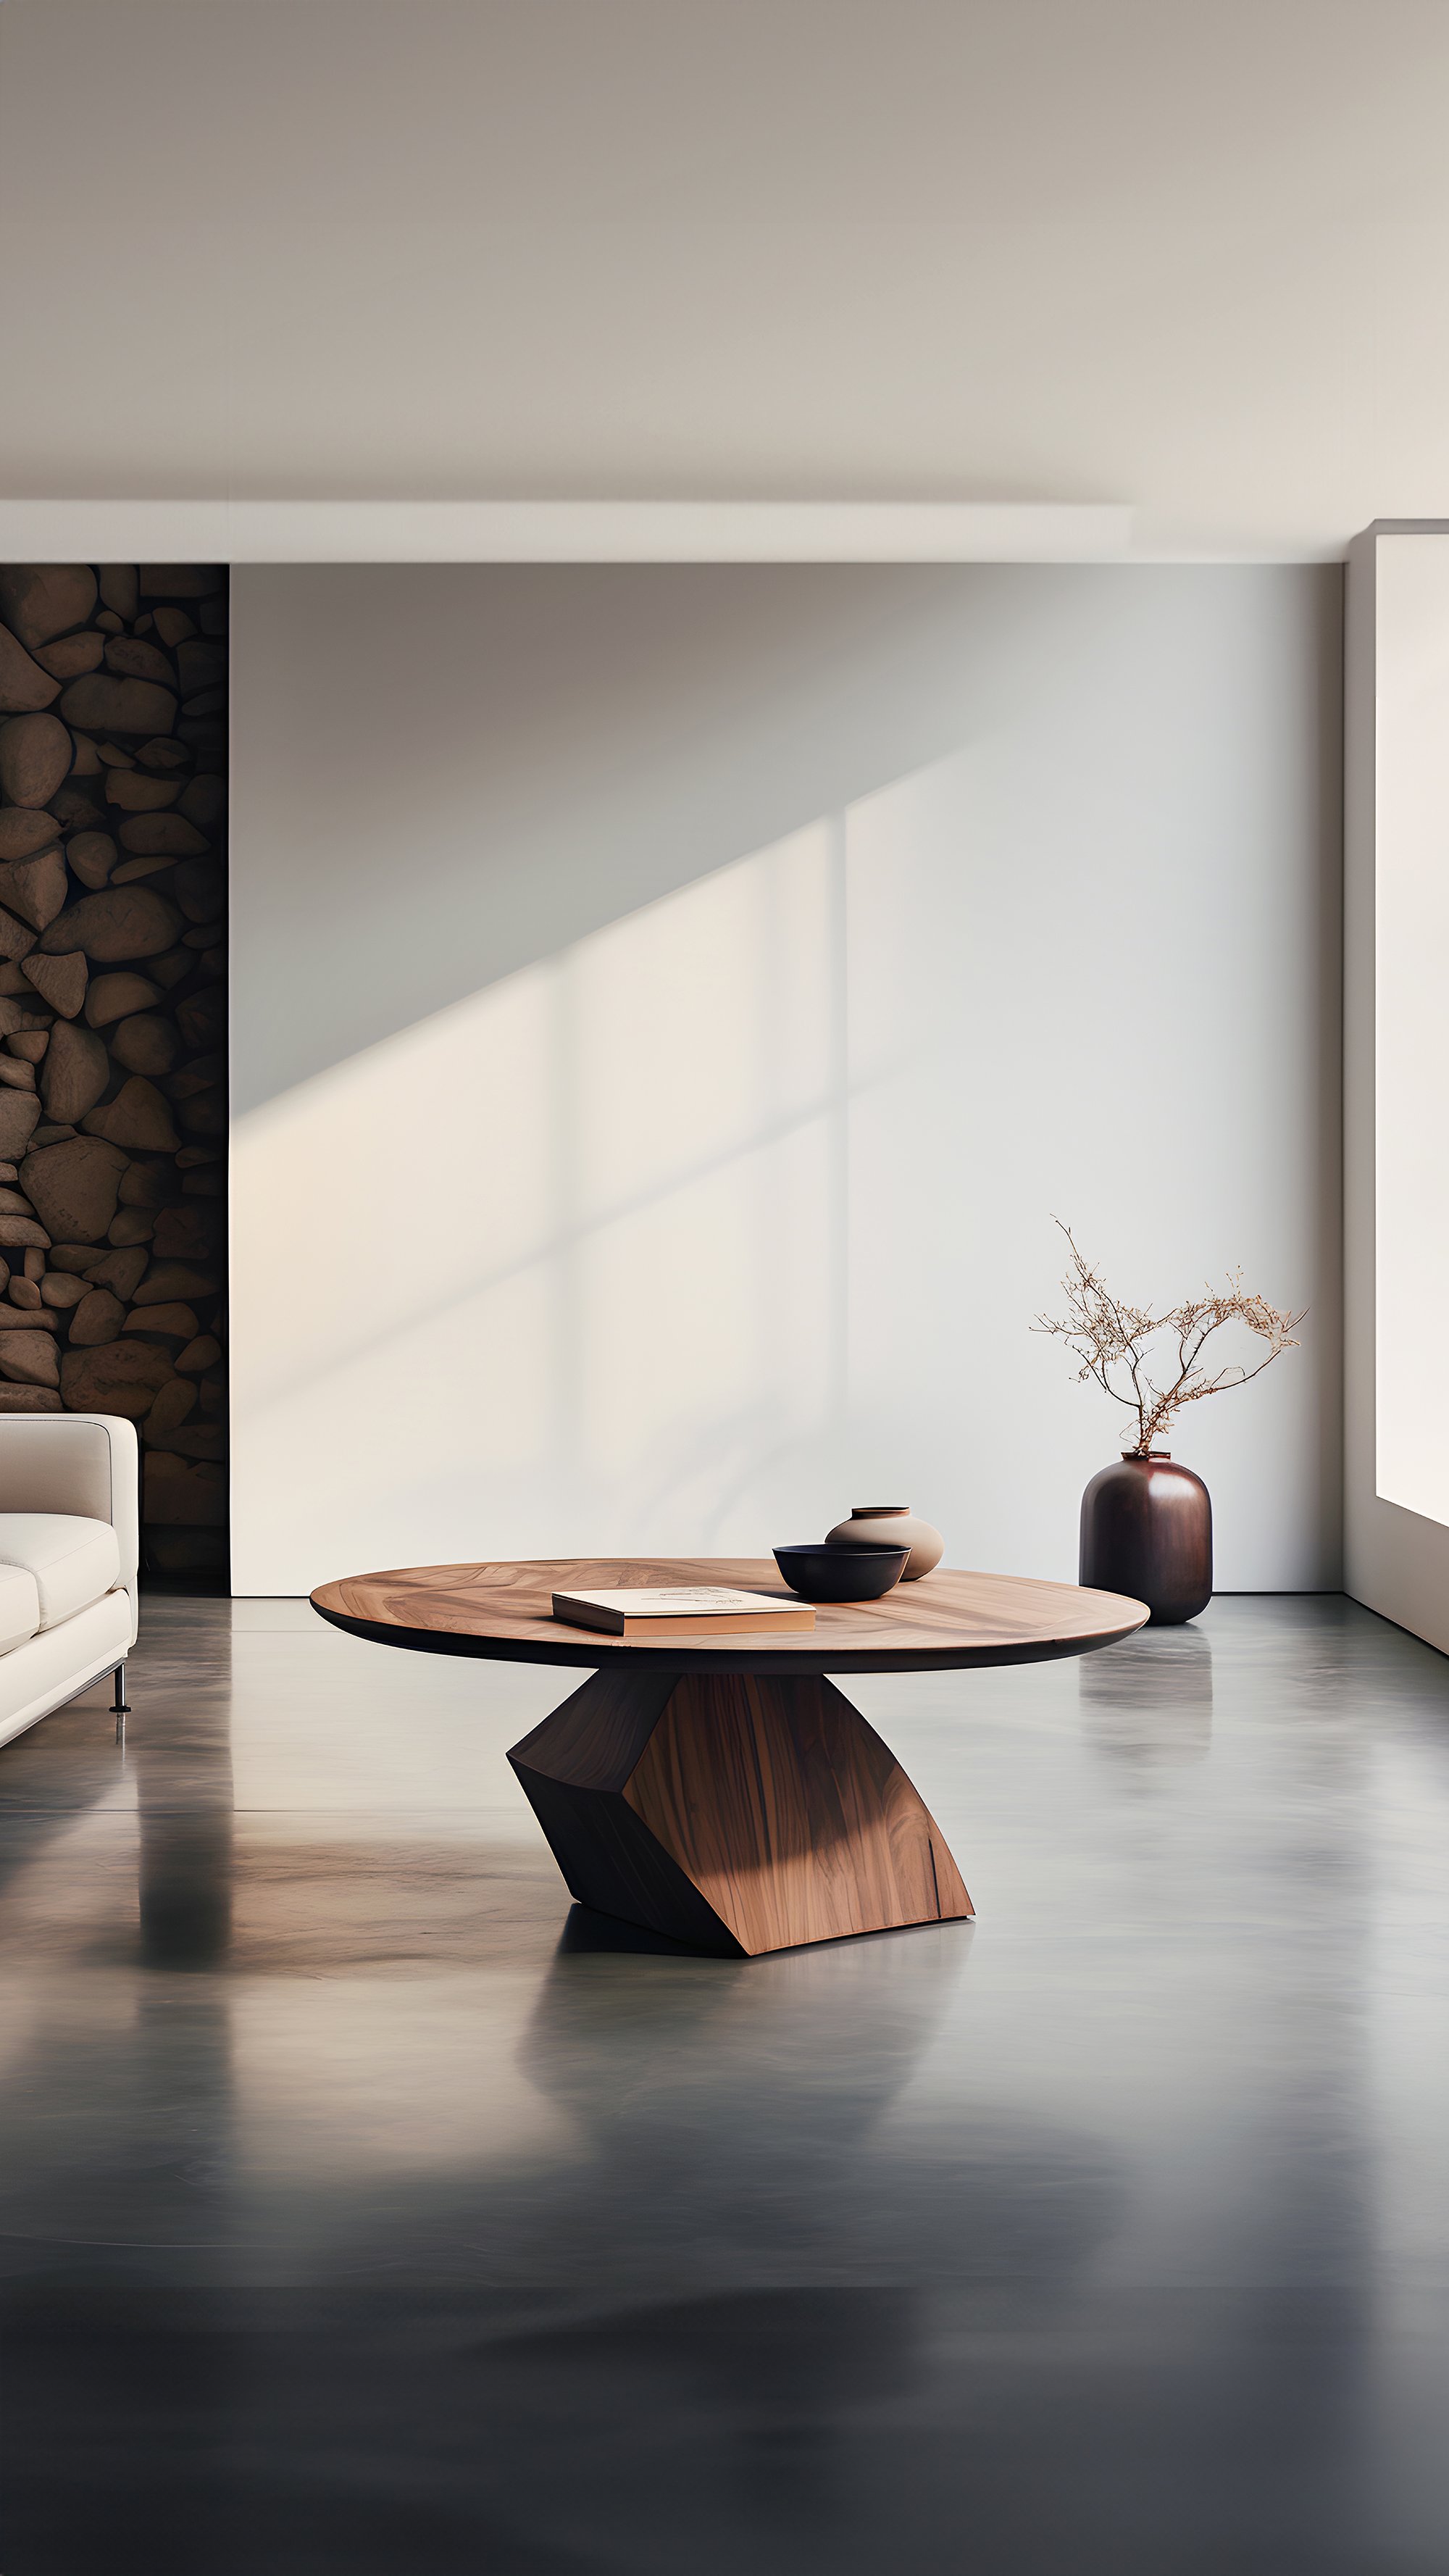 Sculptural Coffee Table Made of Solid Wood, Center Table Solace S36 by Joel Escalona — 7.jpg